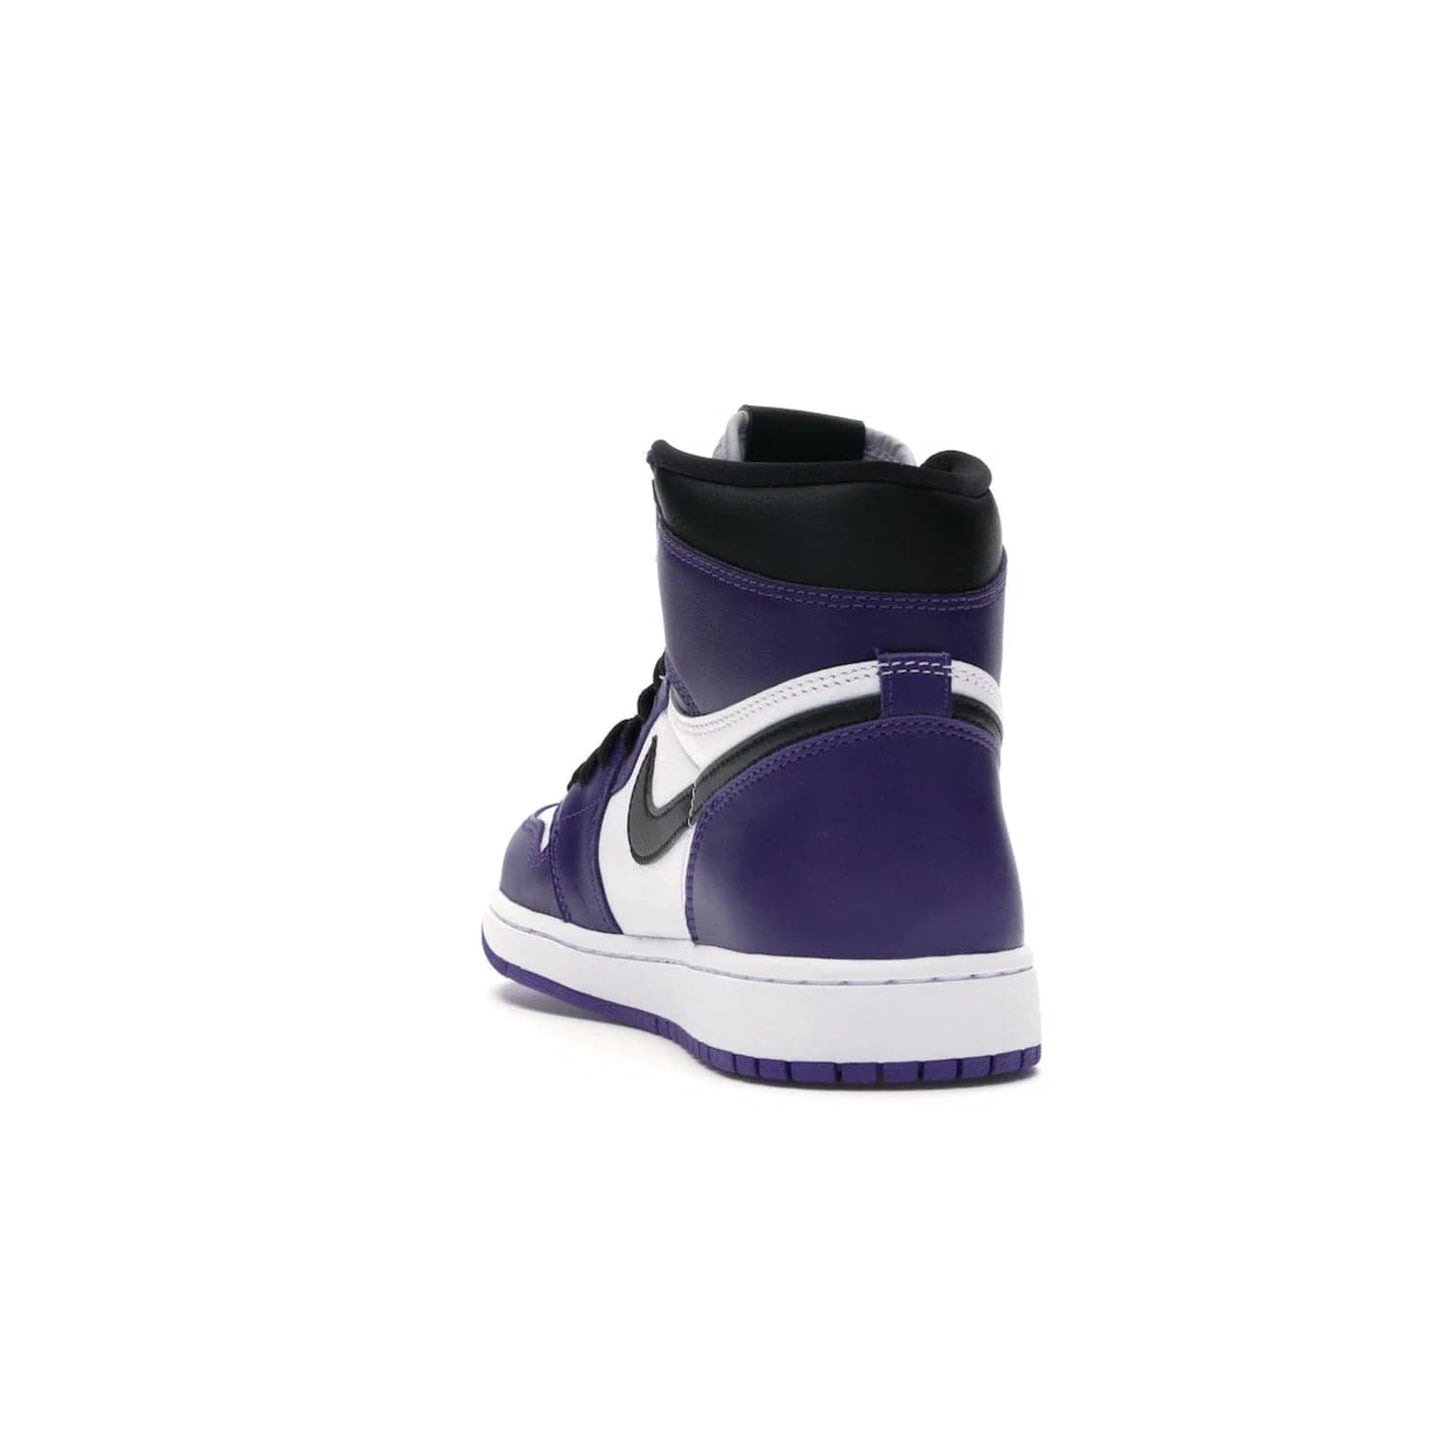 Jordan 1 Retro High Court Purple White - Image 26 - Only at www.BallersClubKickz.com - Grab the classic Jordan 1 Retro High Court Purple White and add major flavor to your collection. White leather upper with Court Purple overlays and Swoosh logo. White midsole and purple outsole. Get yours and rep your Jordan Brand.